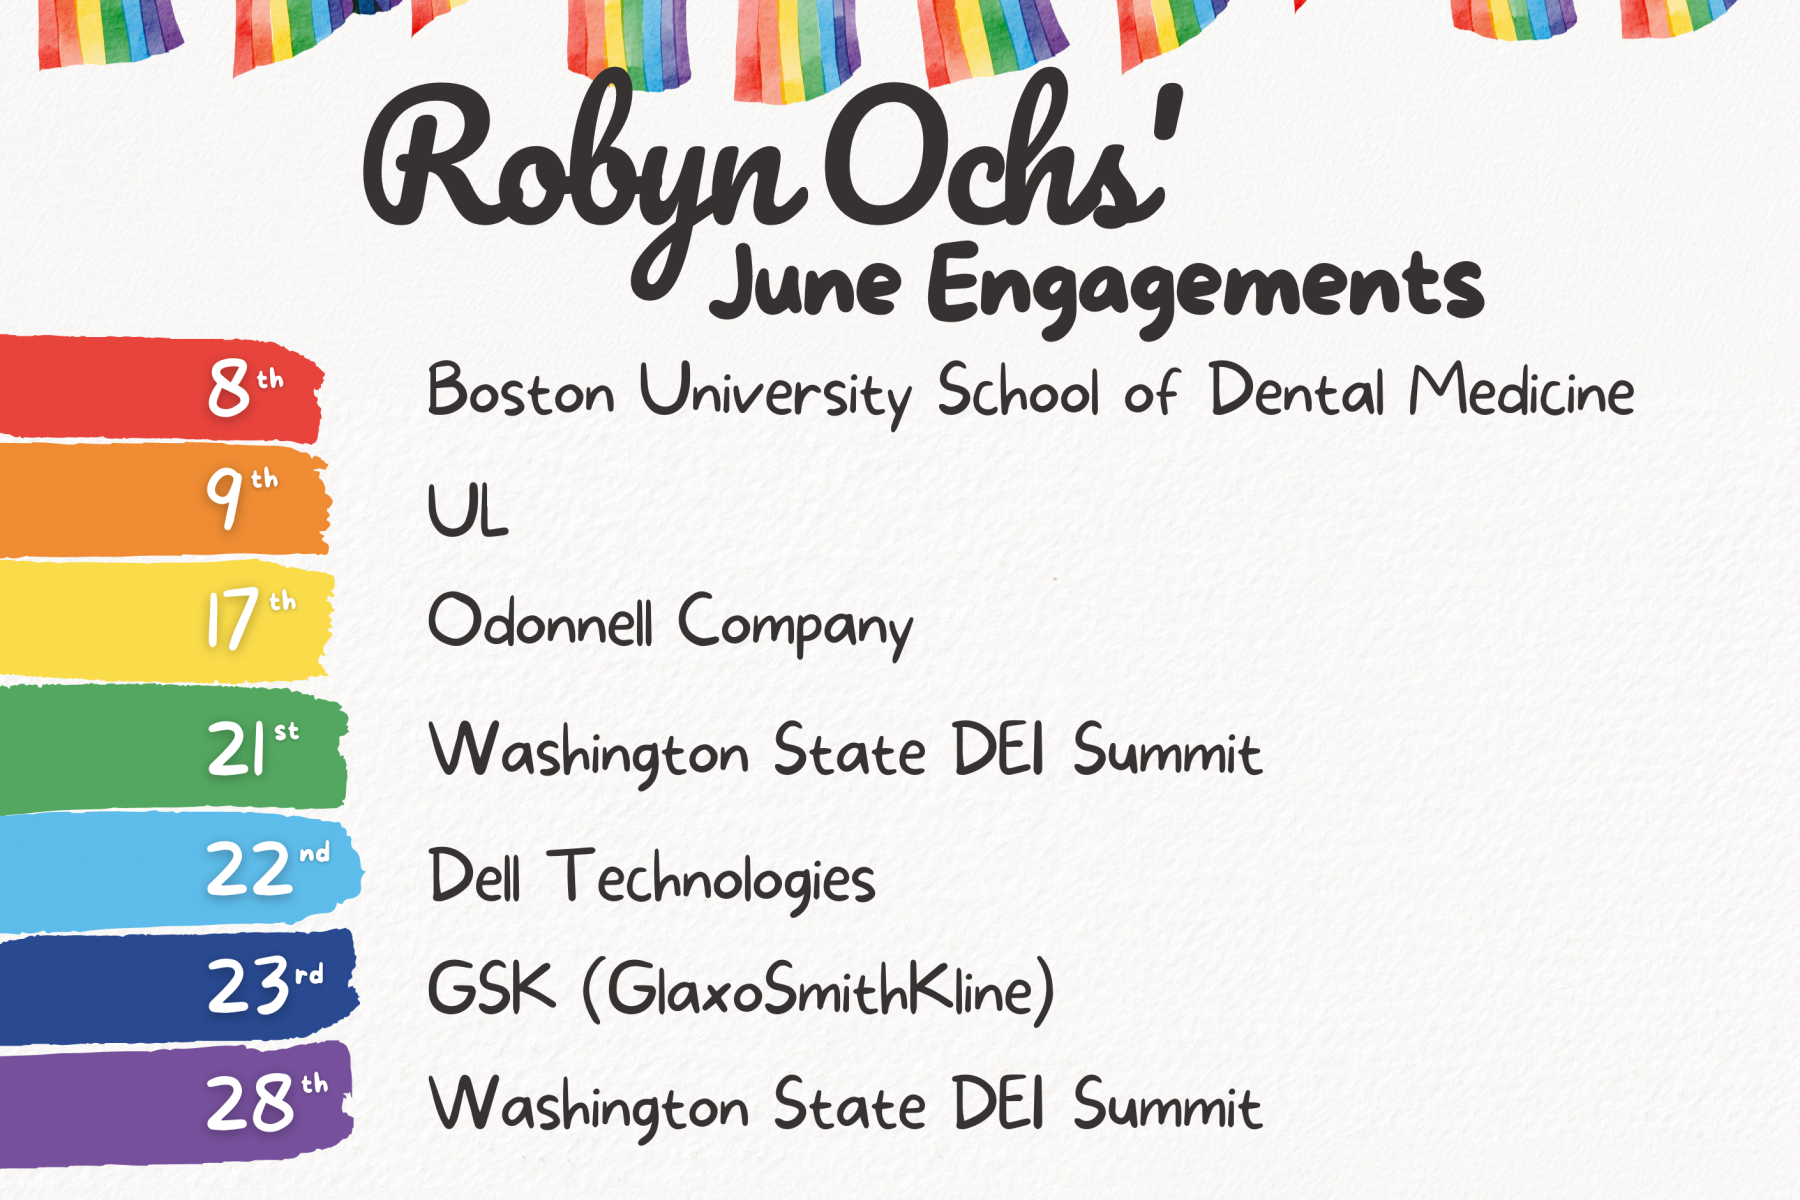 "Robyn Ochs' June Engagements. 8th Boston University School of Dental Medicine, 9th UL, 17th Odonnell Company, 21st Washington State DEI Summit, 22nd Dell Technologies, 23rd GSK (GlaxoSmithKline), 28th Washington State DEI Summit. Please contact robynochsassistant@gmail.com for information about any of these events or to invite Robyn to speak." There is a watercolor banner of pride flags across the top of the page.